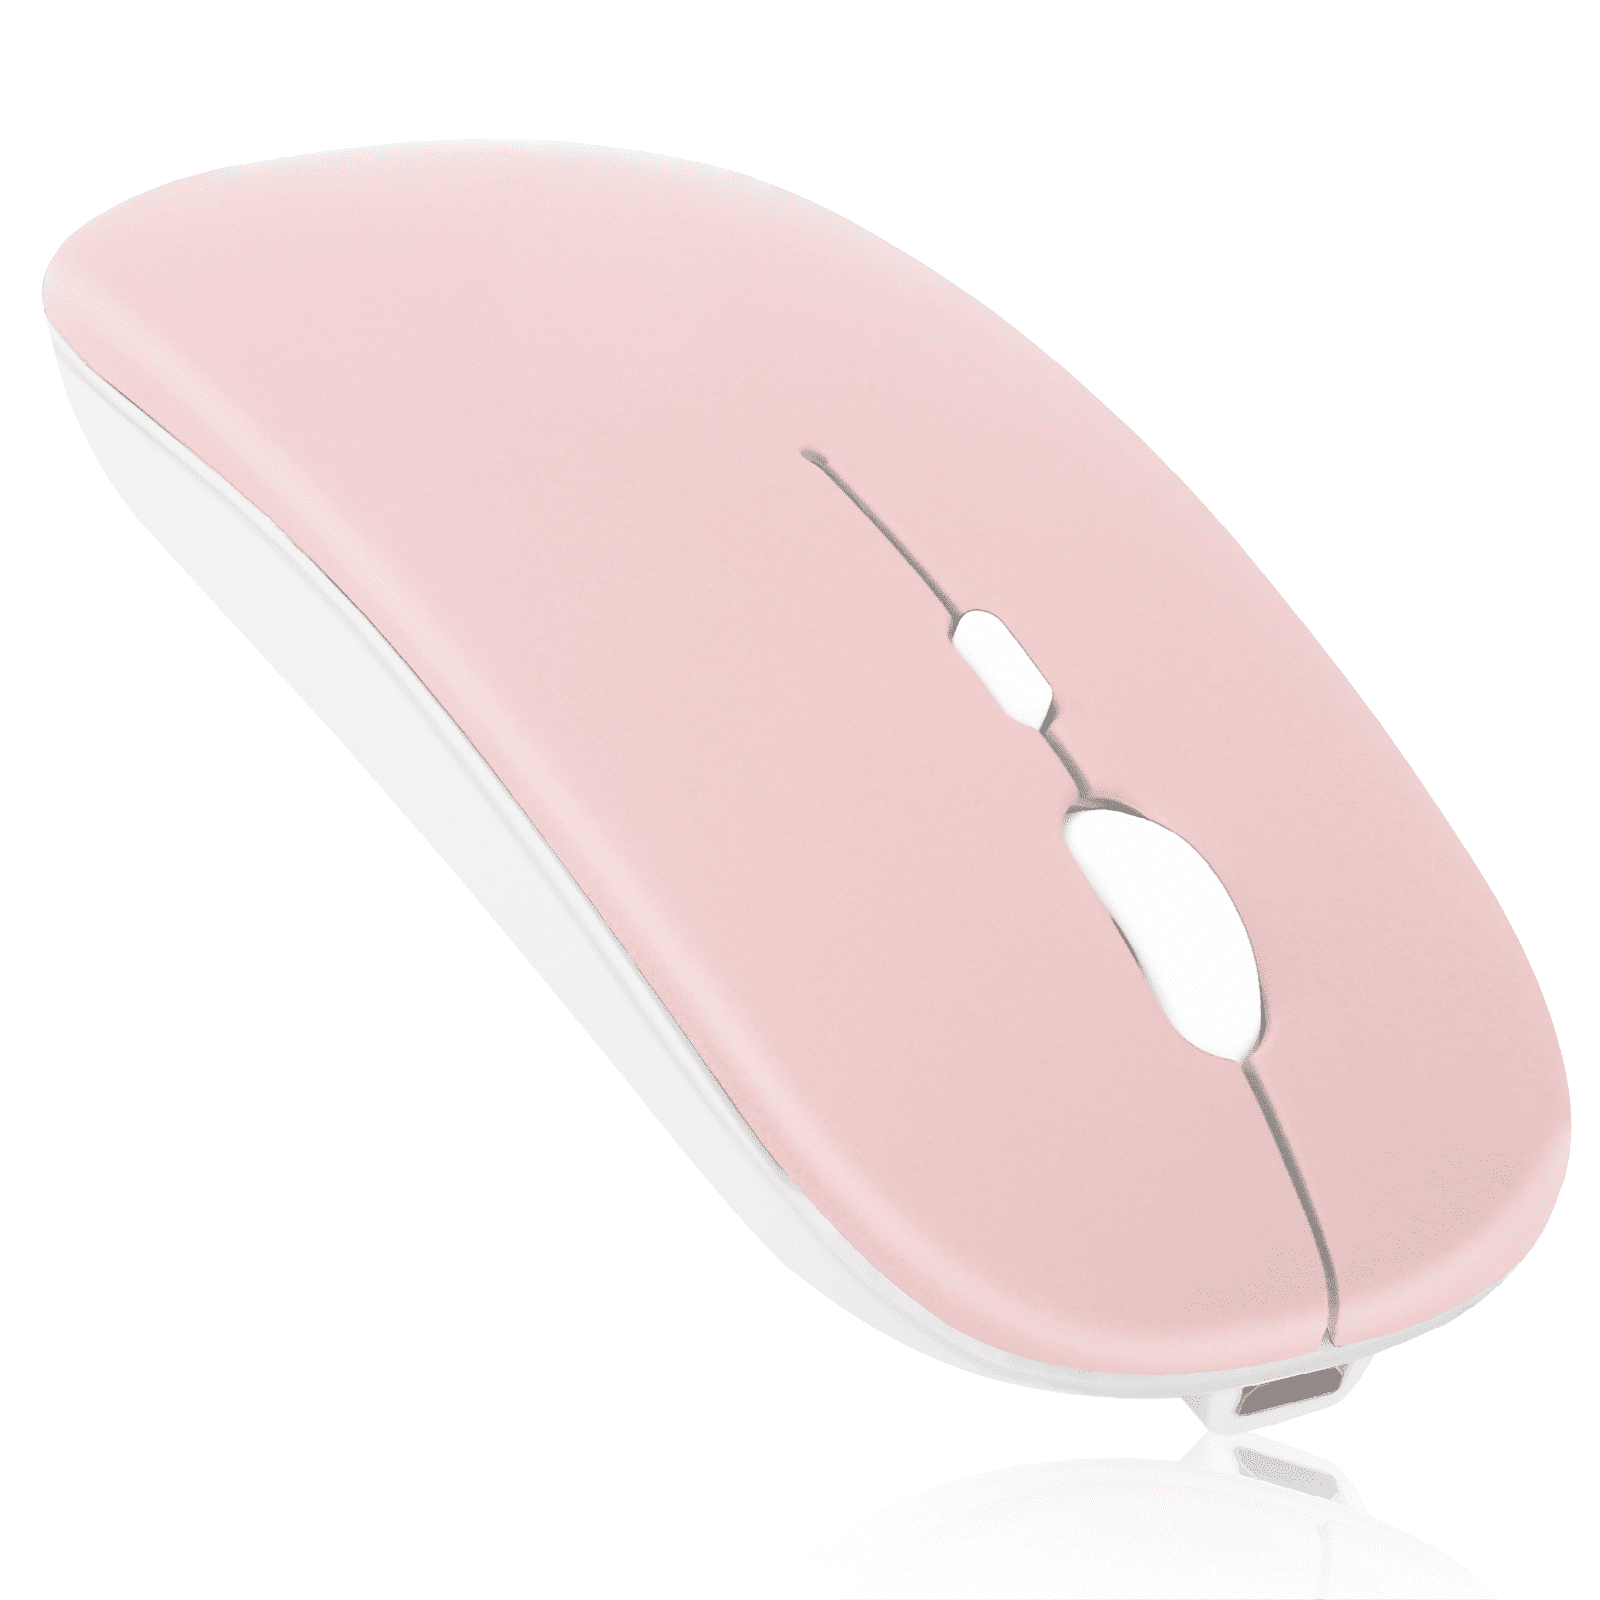 Bluetooth Rechargeable Mouse for Apple MacBook Pro MGXA2LL/A 